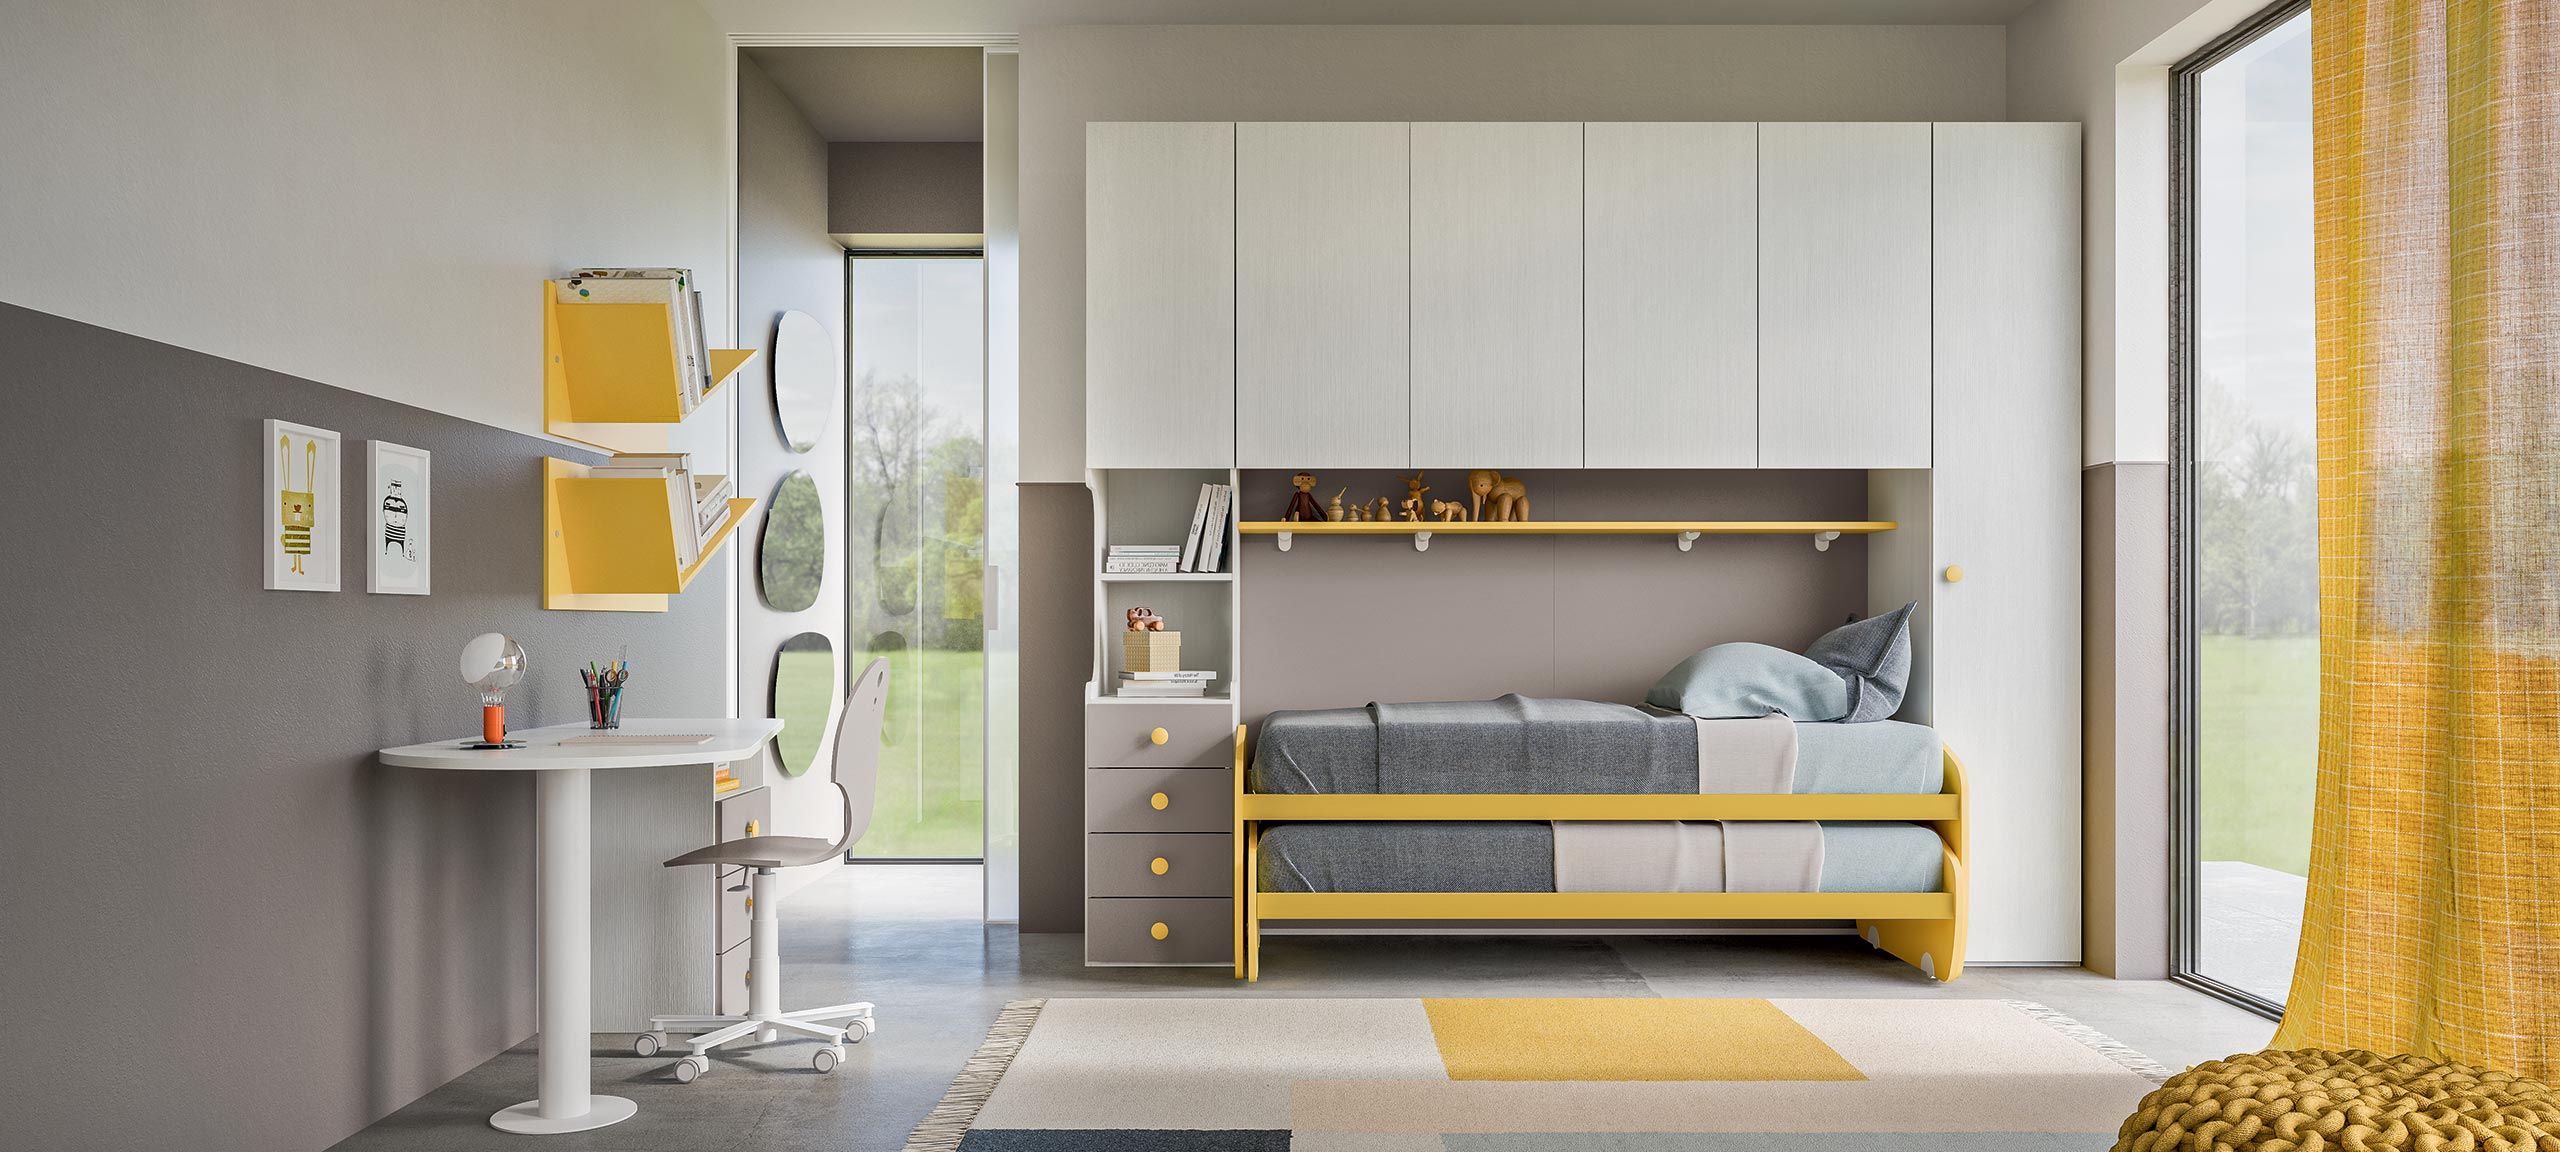 Children?s Bedrooms With Bedroom Cabins | Mab Home Furniture In Overbed Wardrobes (Gallery 5 of 20)